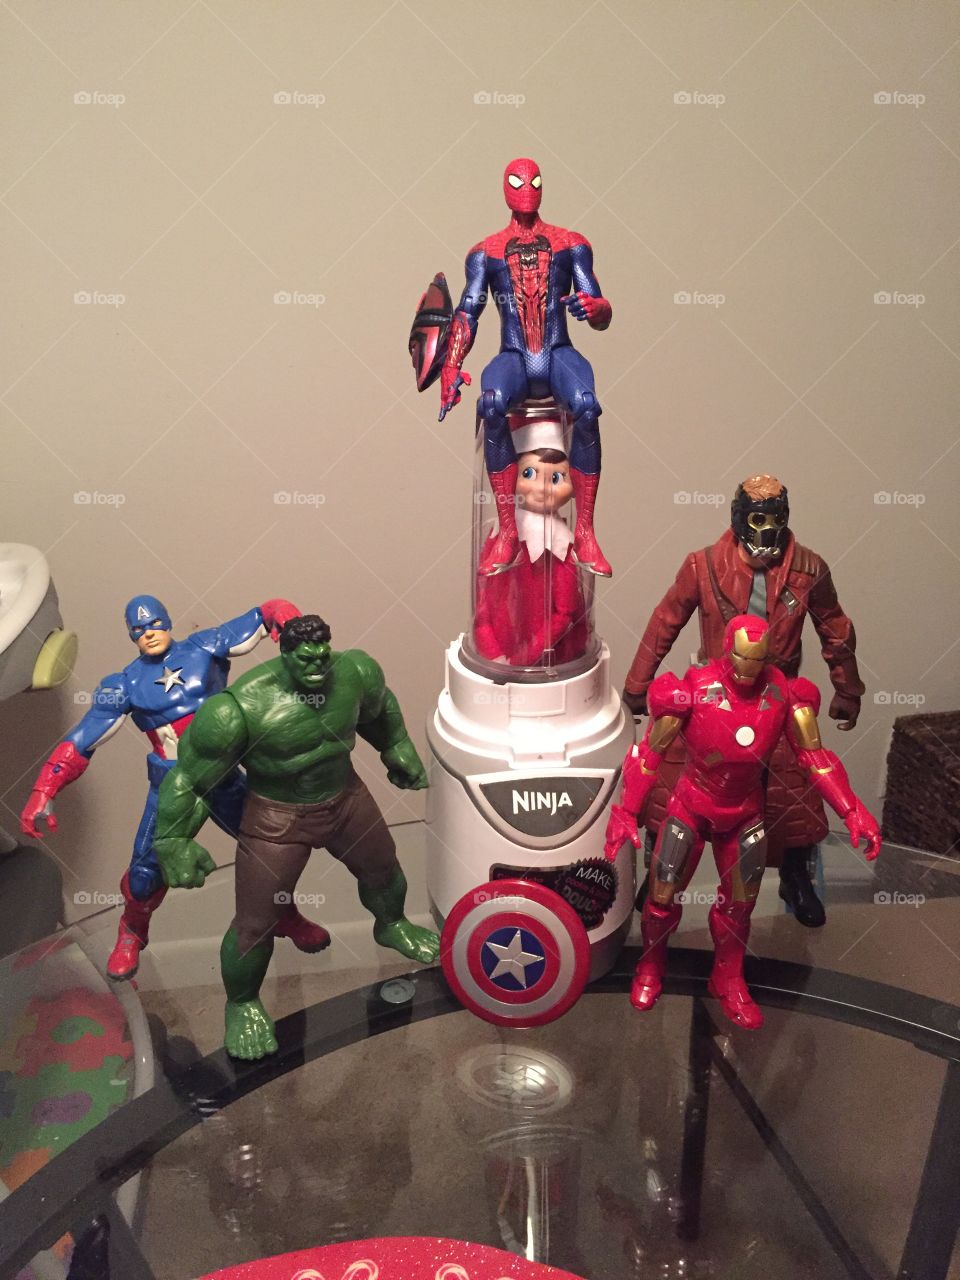 And the Avengers strike again saving the world from this mutant elf on the shelf! 